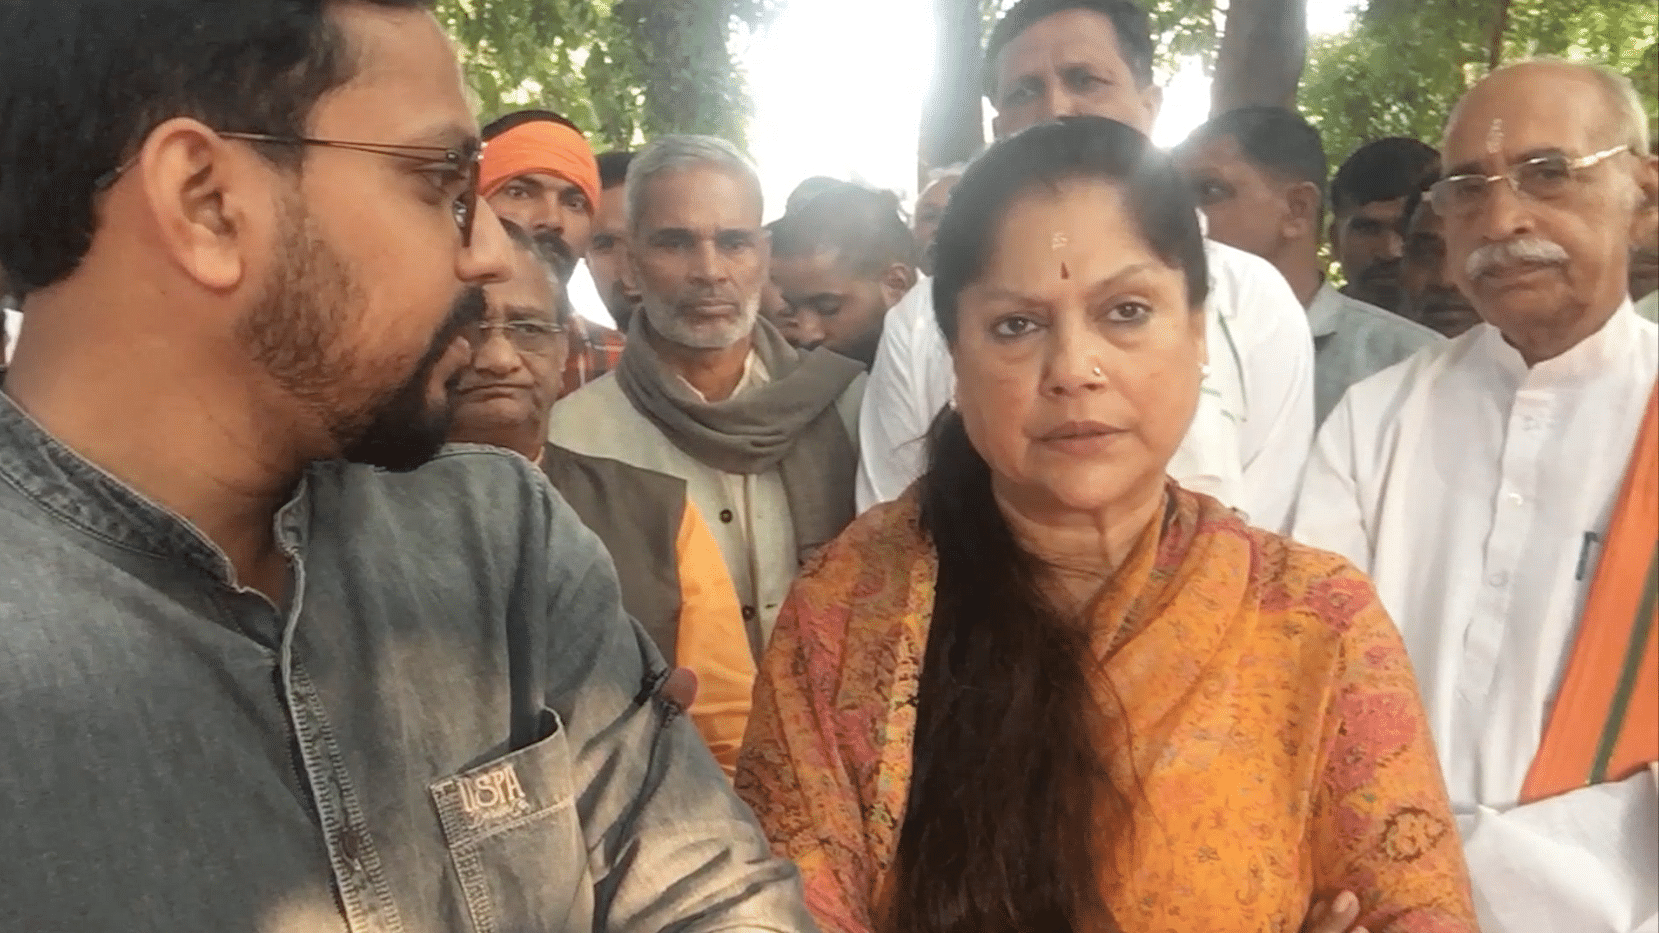 Yashodhara Raje Scindia, Minister of Commerce in MP government.